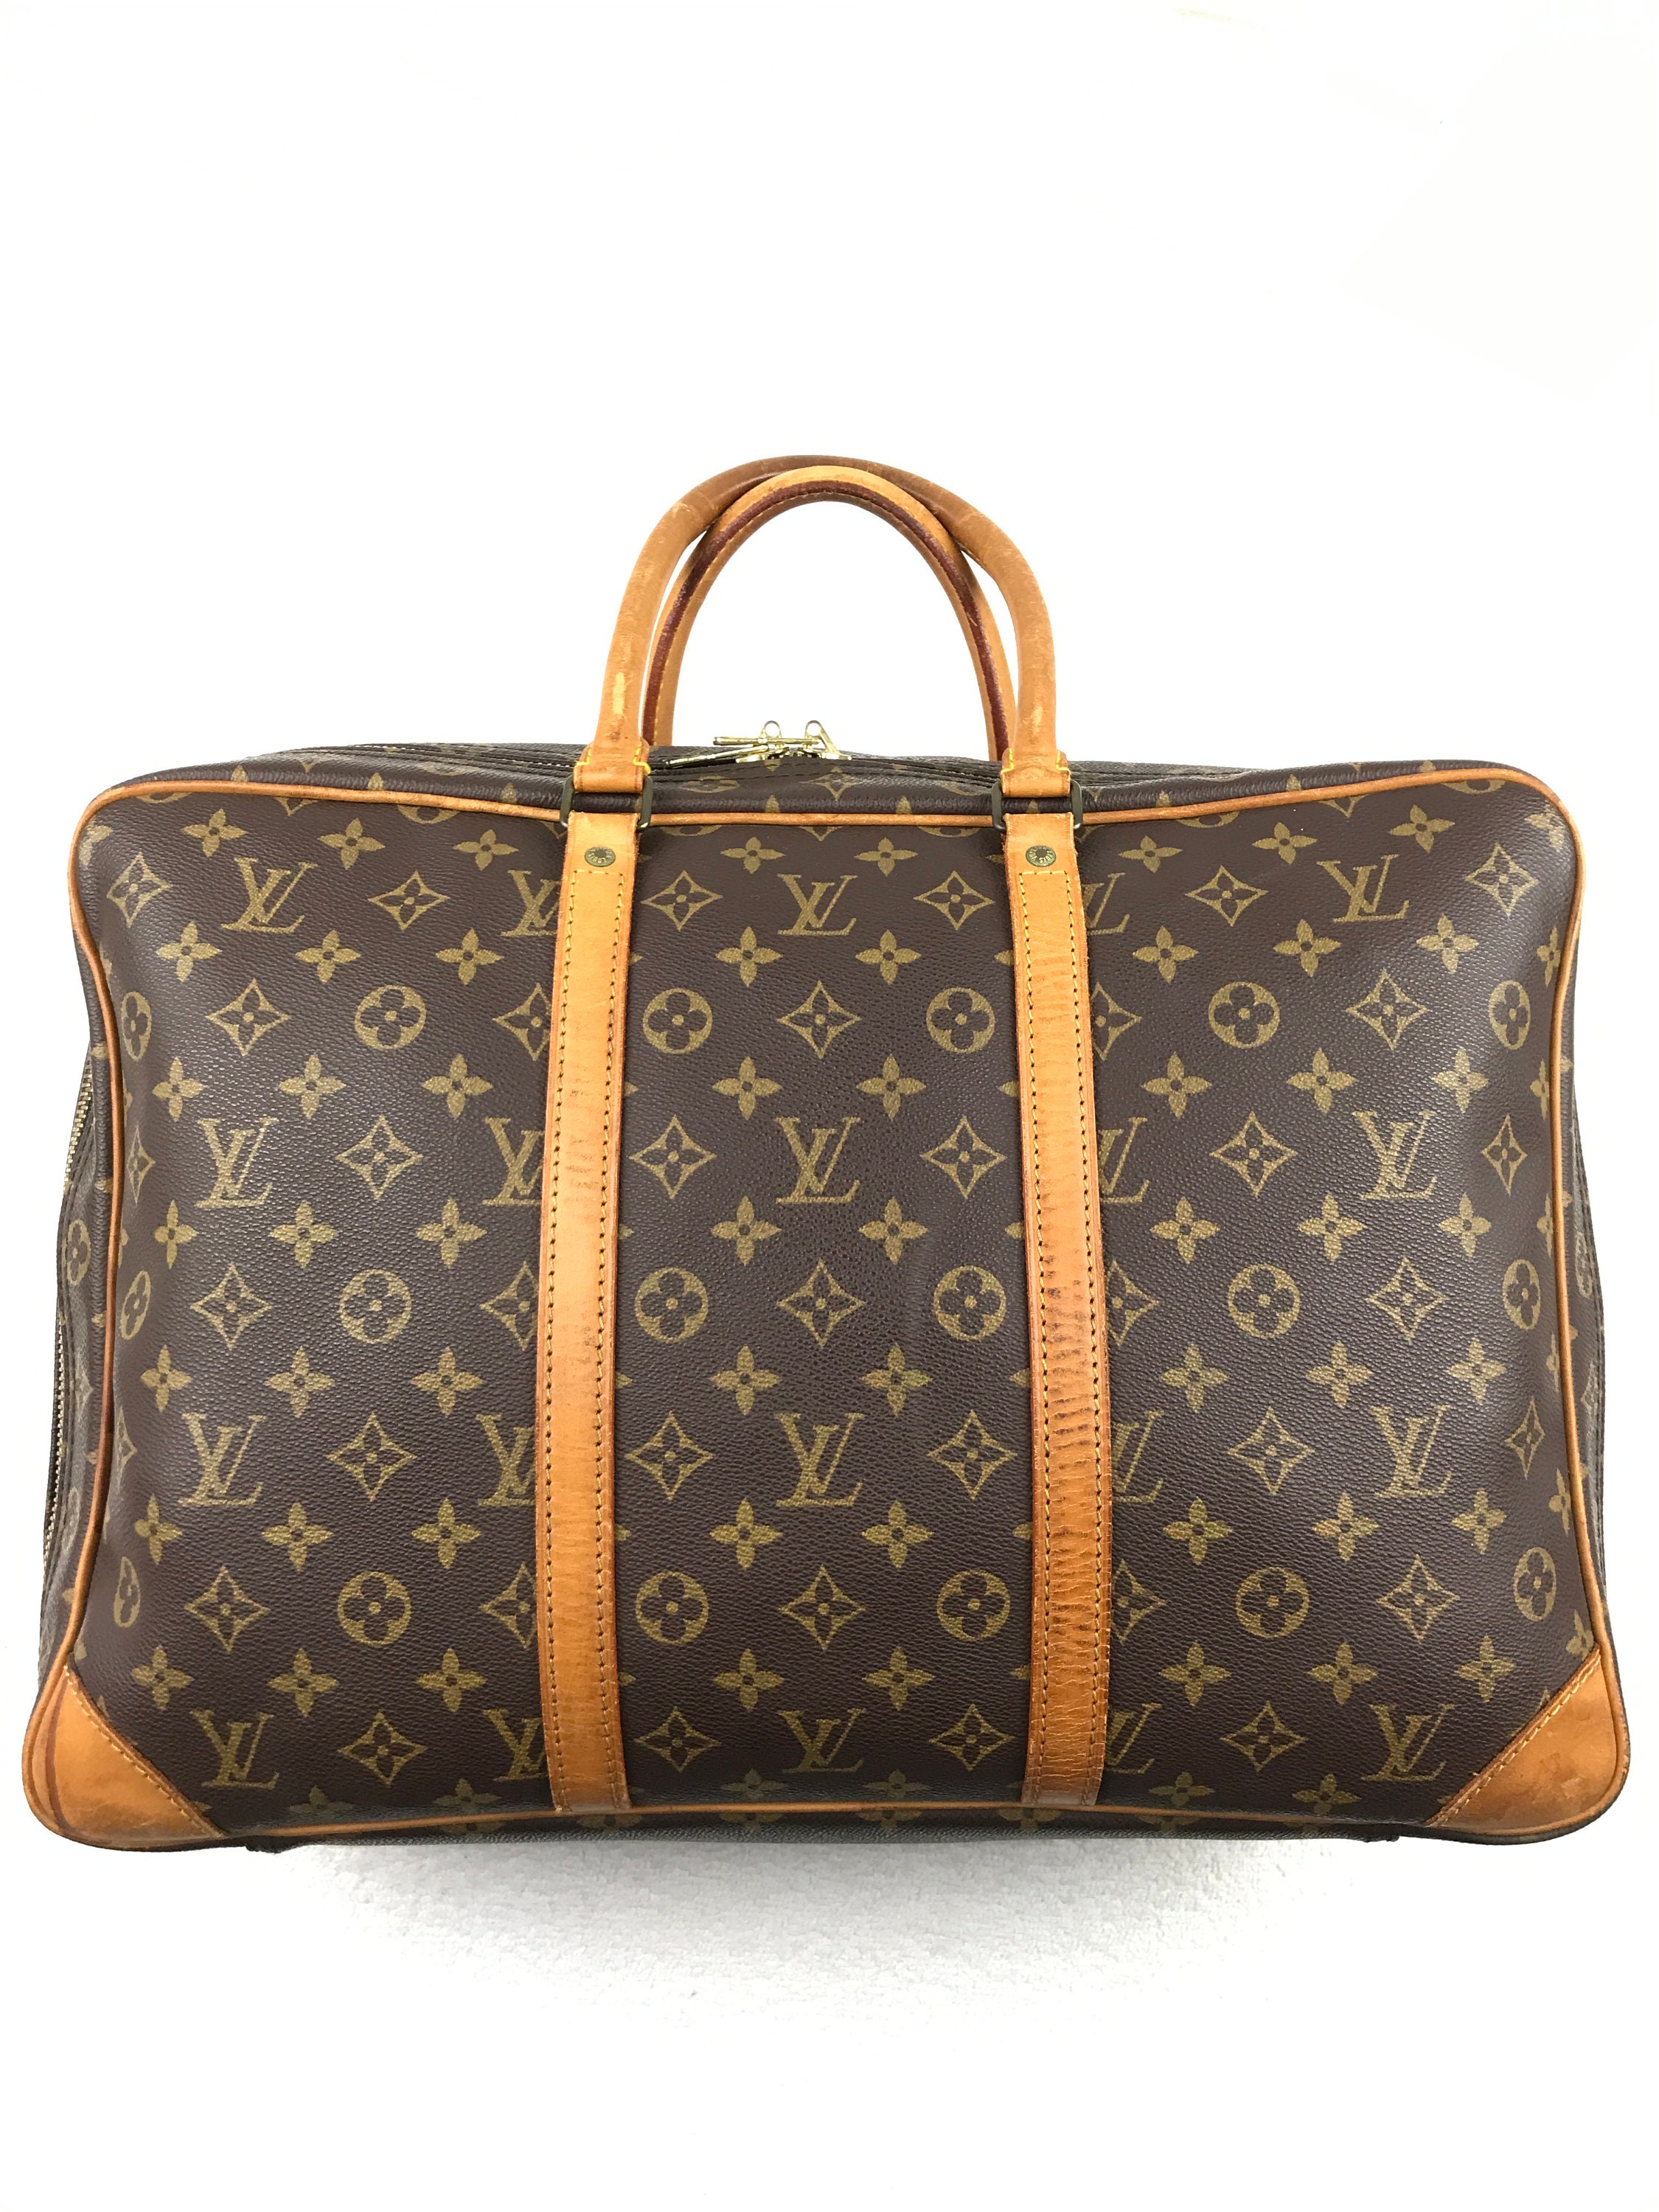 LOUIS VUITTON Kid Super Portrait Bandouliere Keepall 55 - New with Box